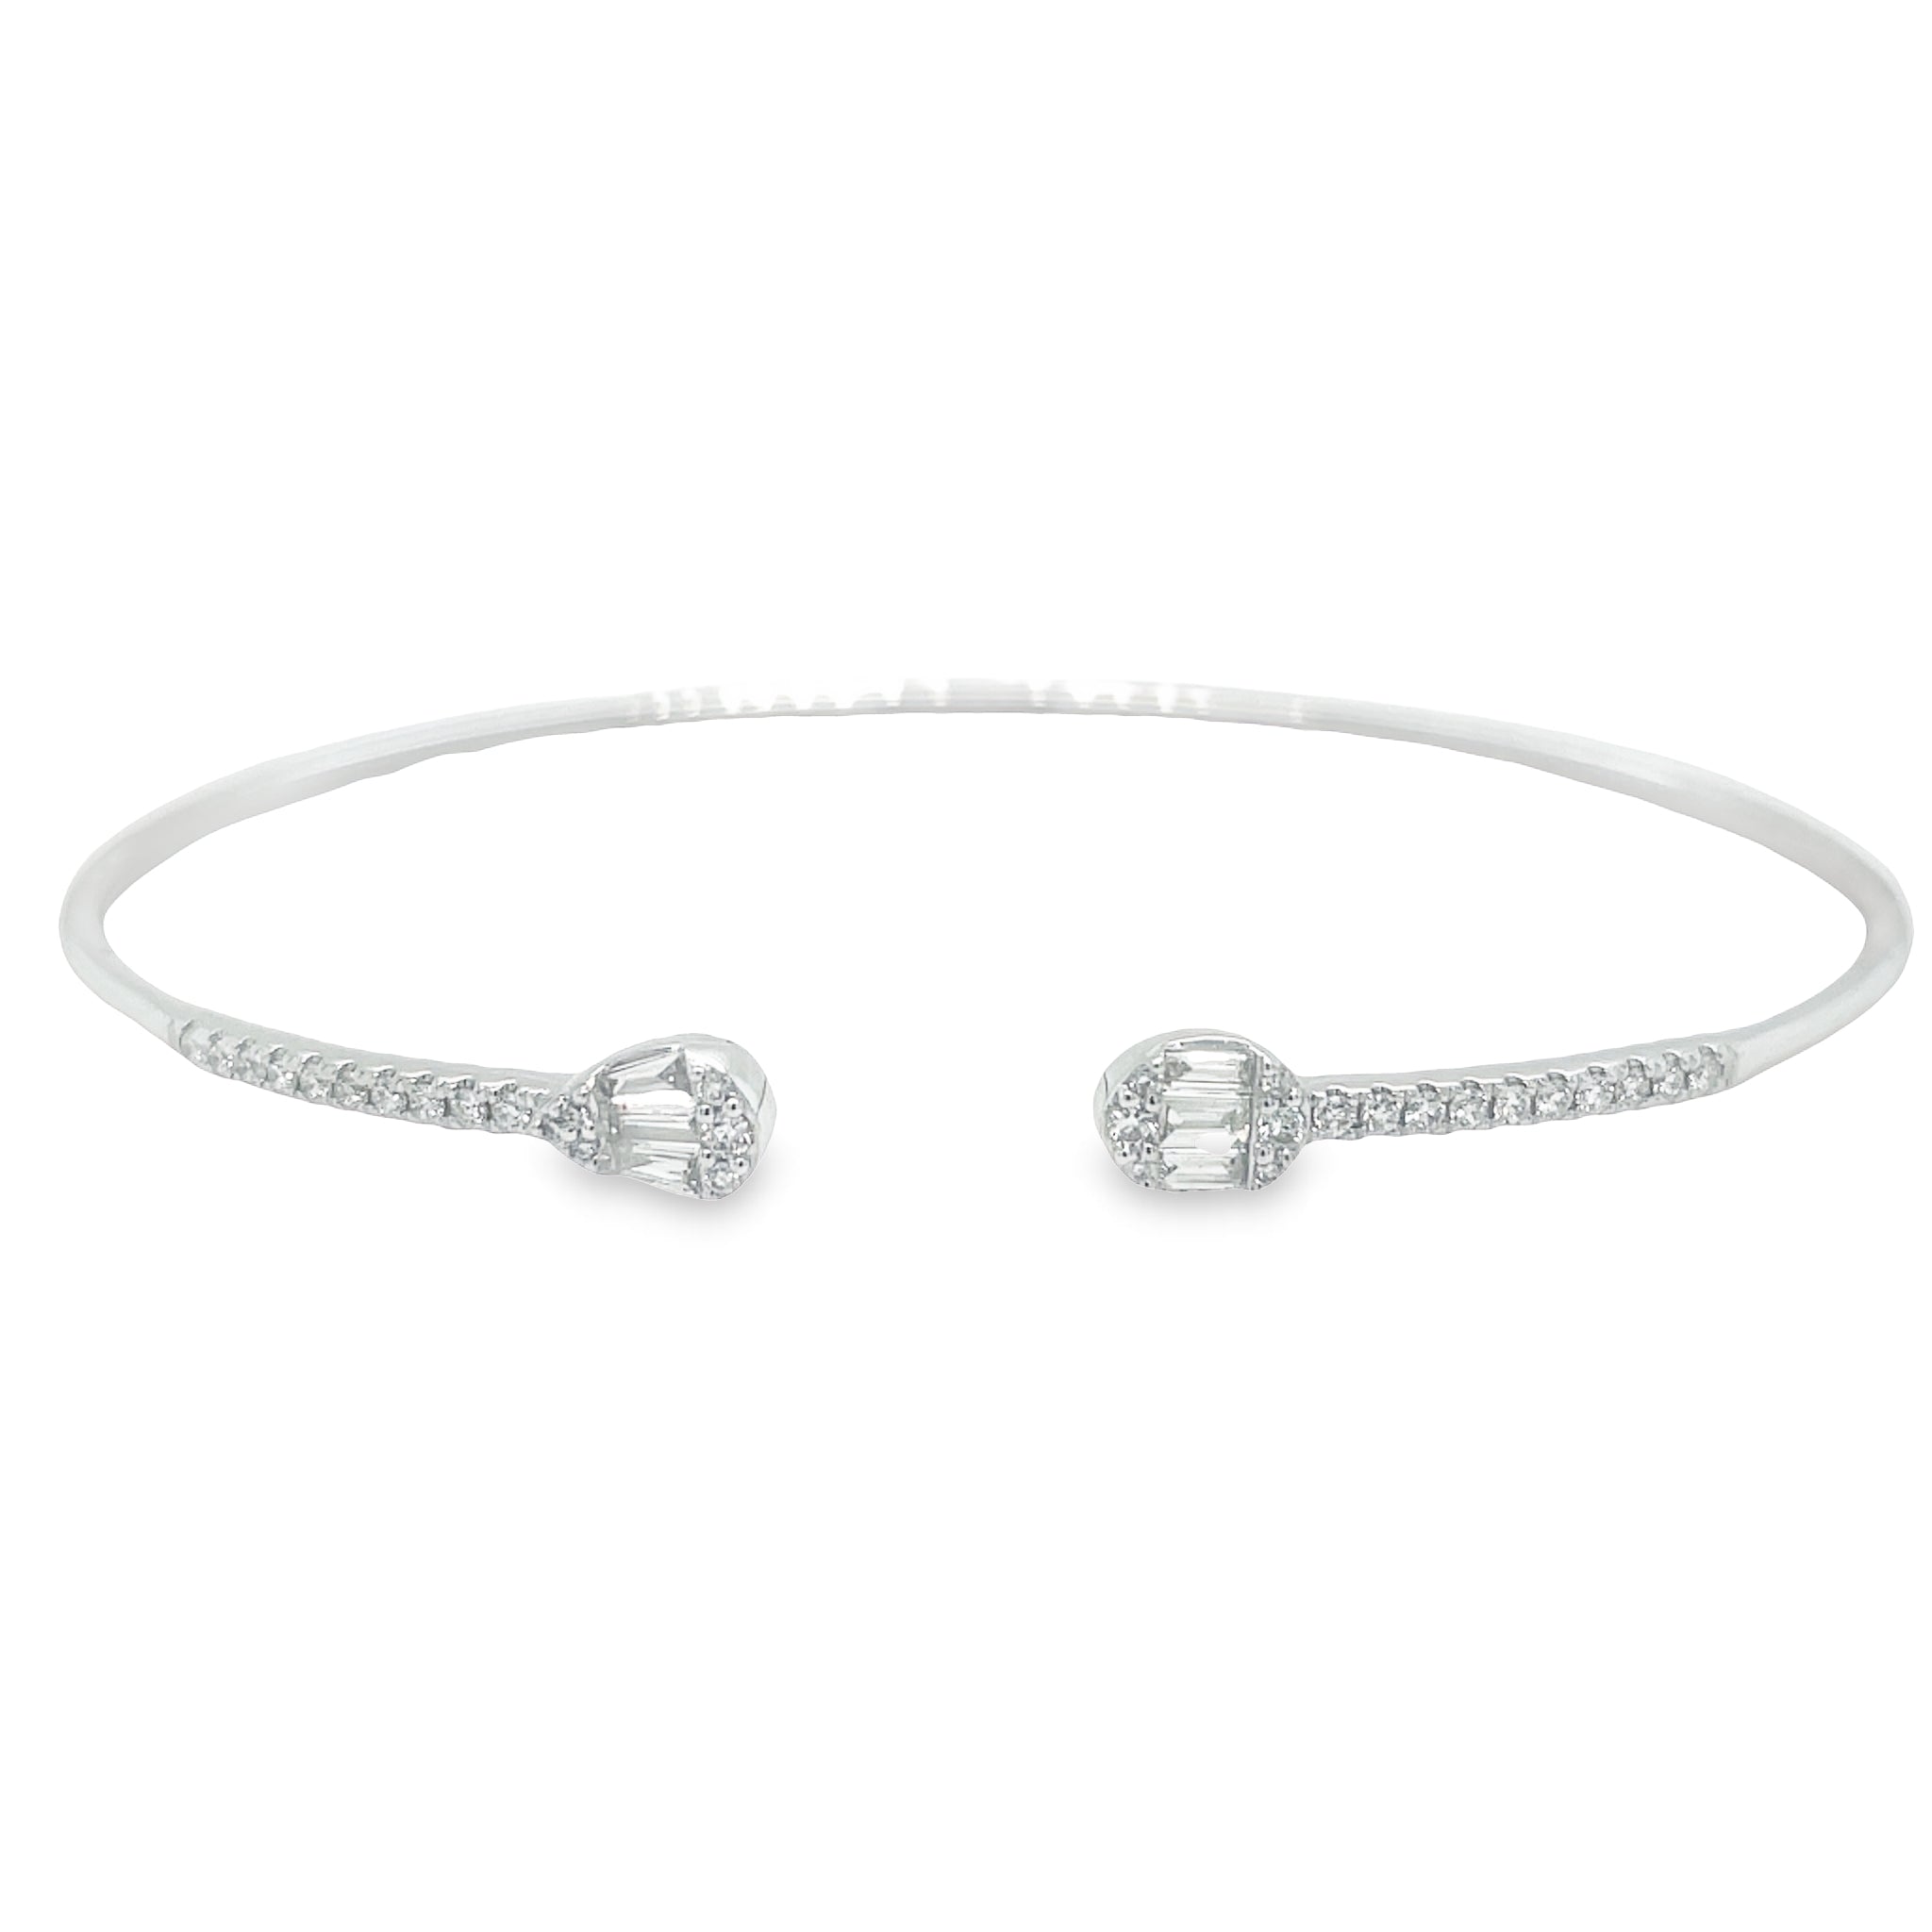 This diamond flexible white gold bangle is the perfect choice for effortless elegance. Crafted with 1.30 cts of brilliant diamonds, it slips on easily for glamorous style. Add a classic touch to any look with this timeless piece.